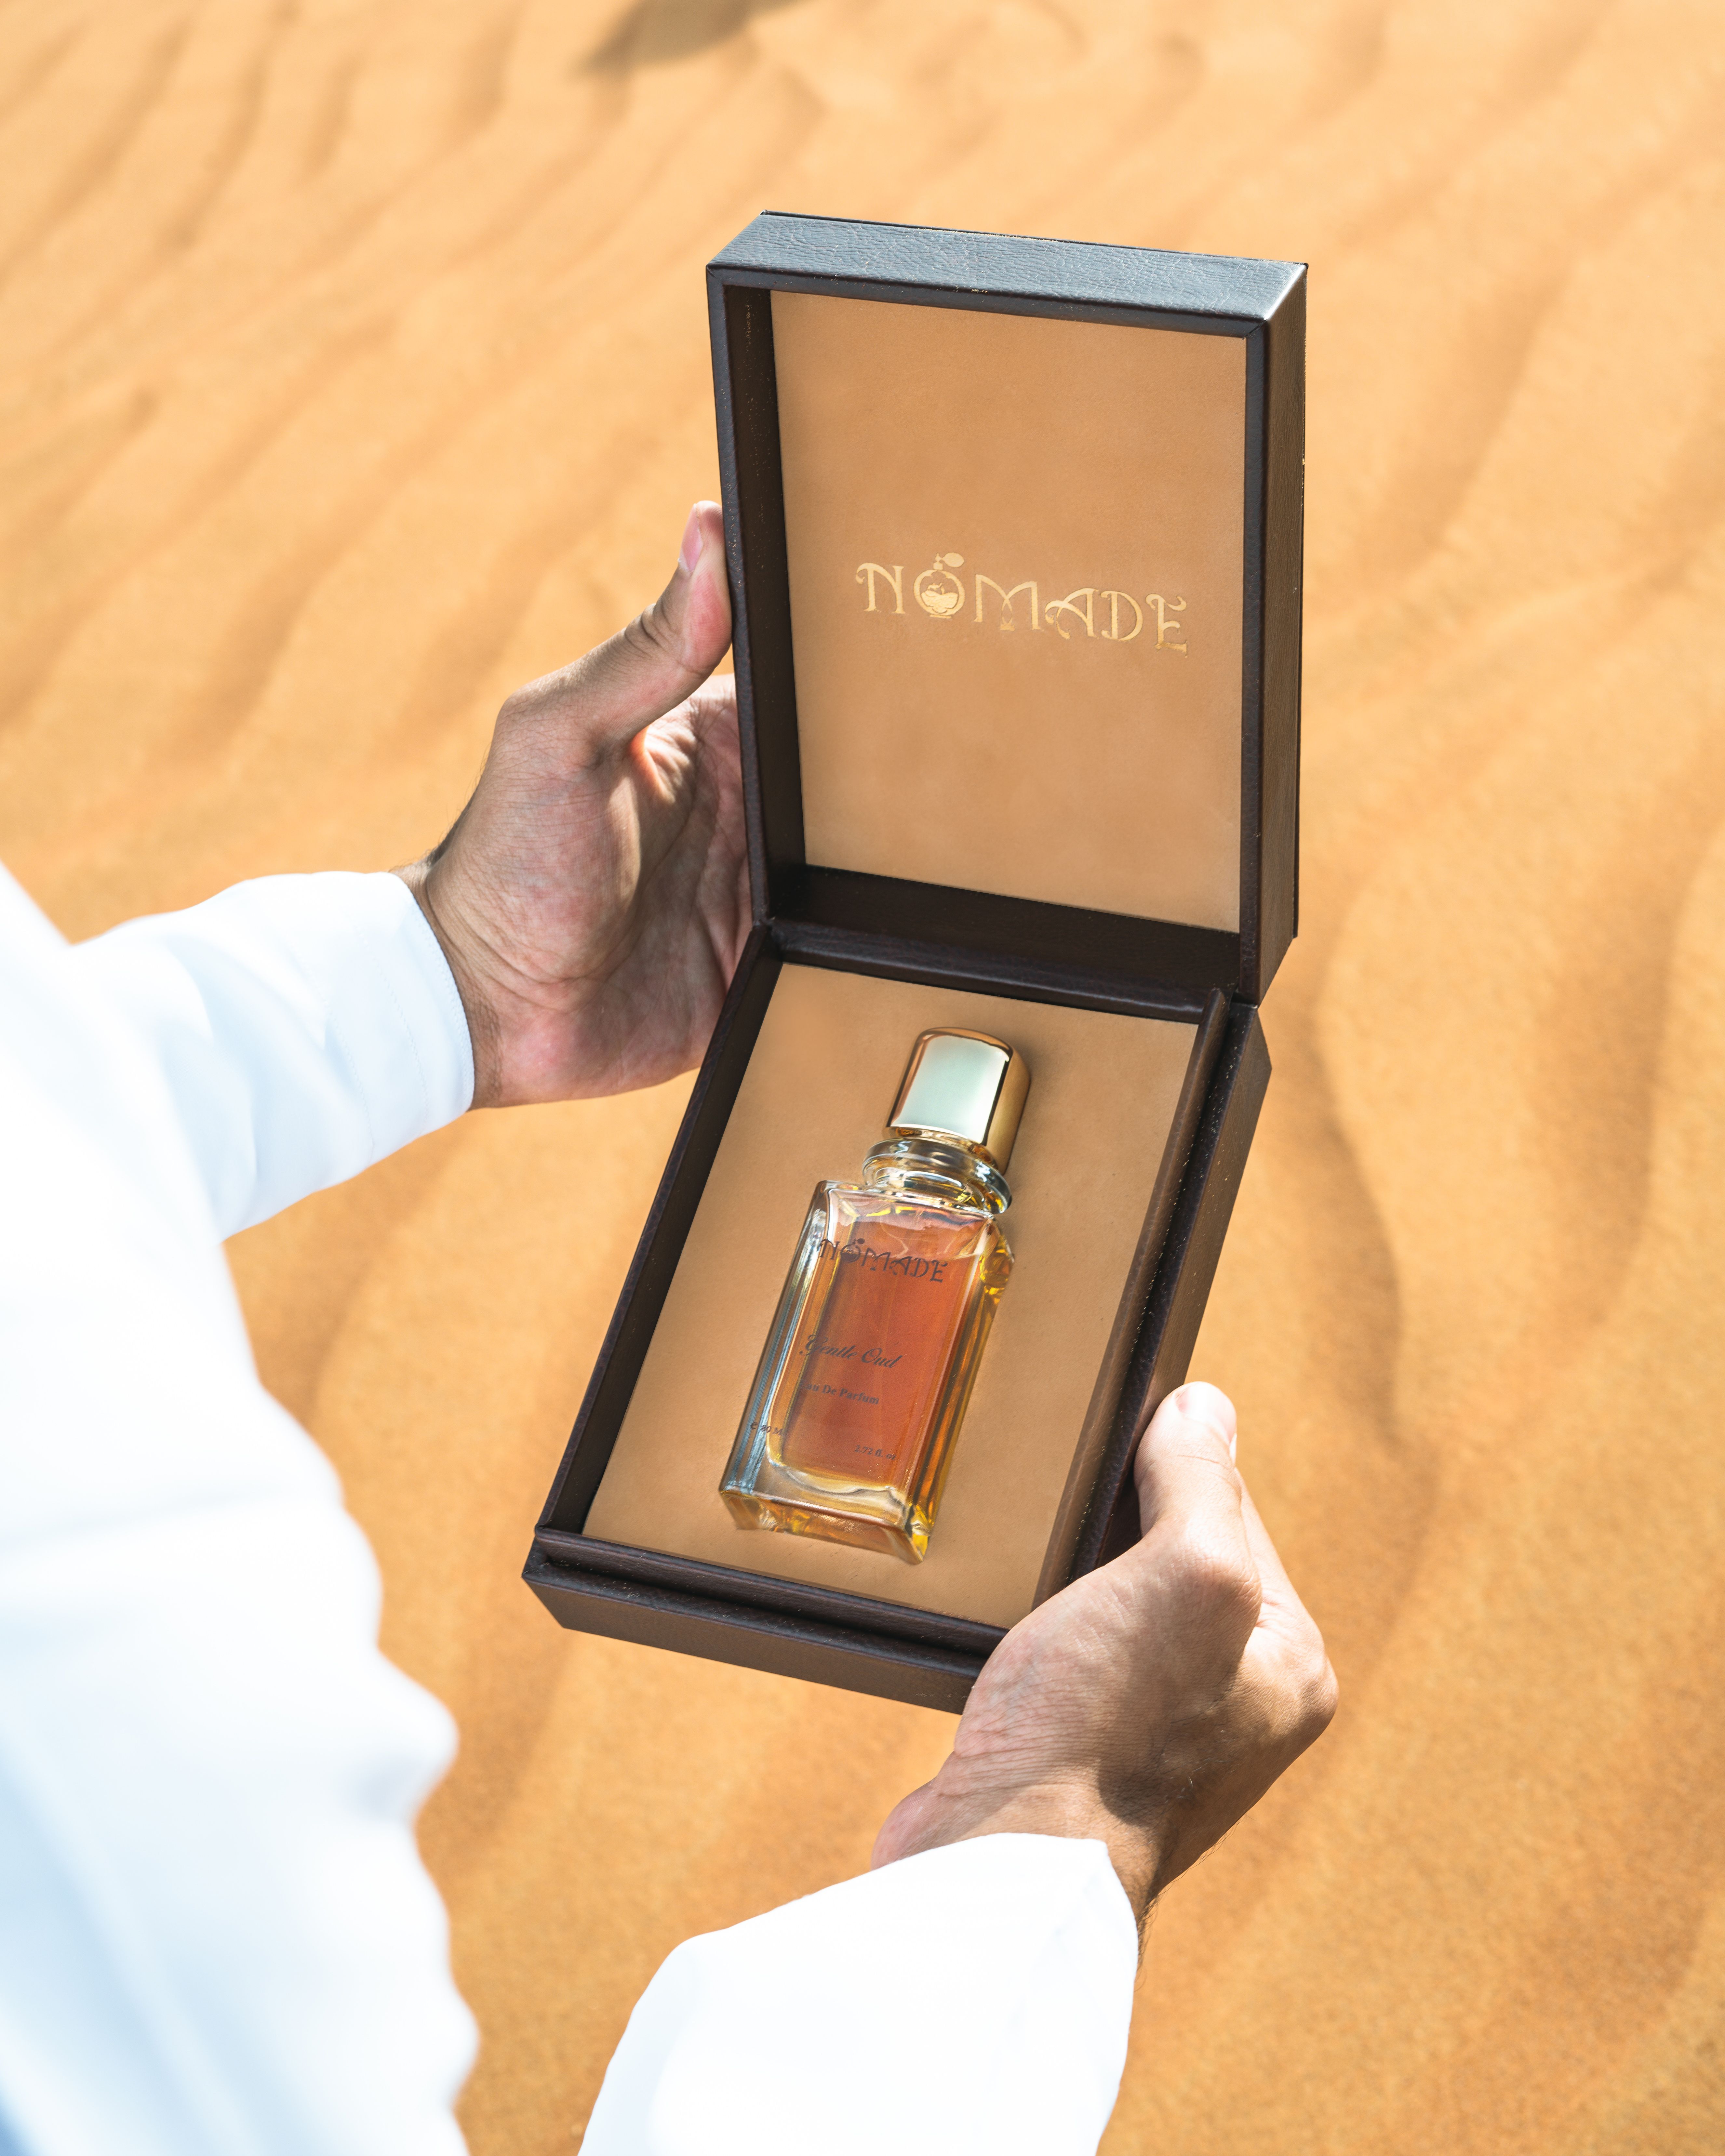 nomade oud perfume